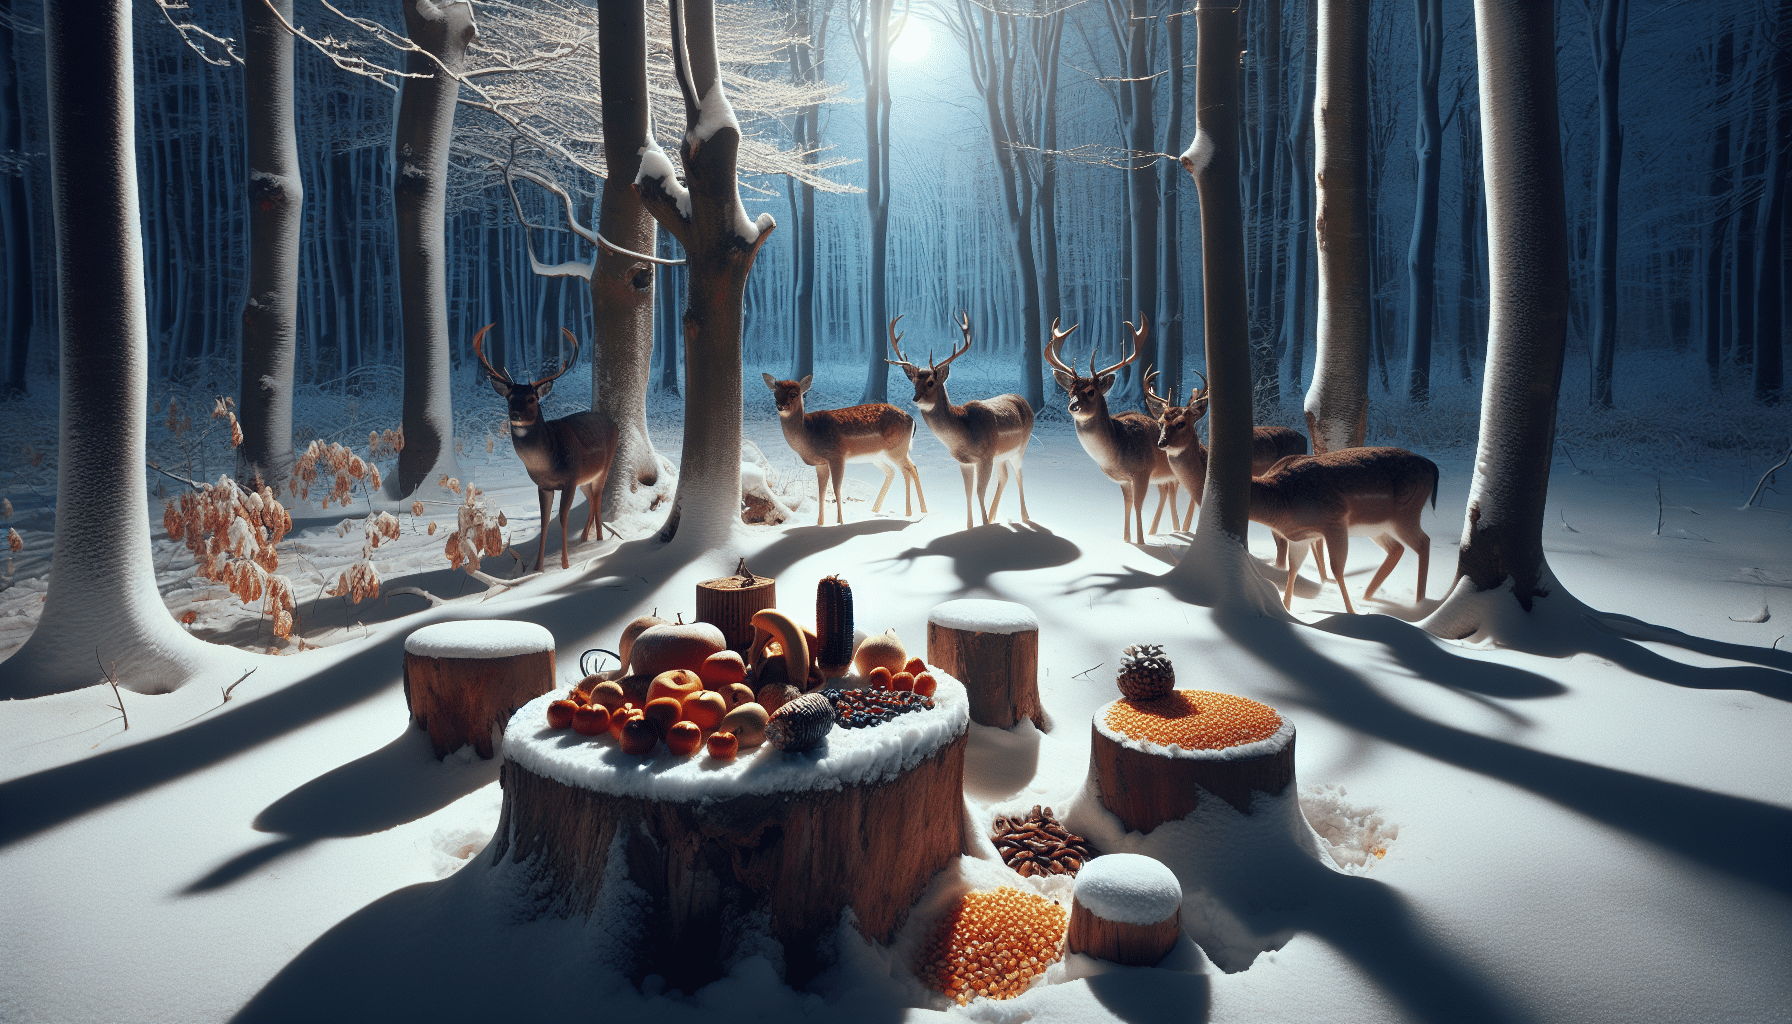 A snowy winter scene with several deer. They are in a forest clearing, surrounded by leafless trees and a white blanket of fresh snow. Close by on a tree stump is an array of suitable food for deer in winter - fruits, vegetables and corn kernels. The moonlight casts long shadows and gives the scene a soft, tranquil glow. Please avoid including people, text, and brand names or logos in the image.